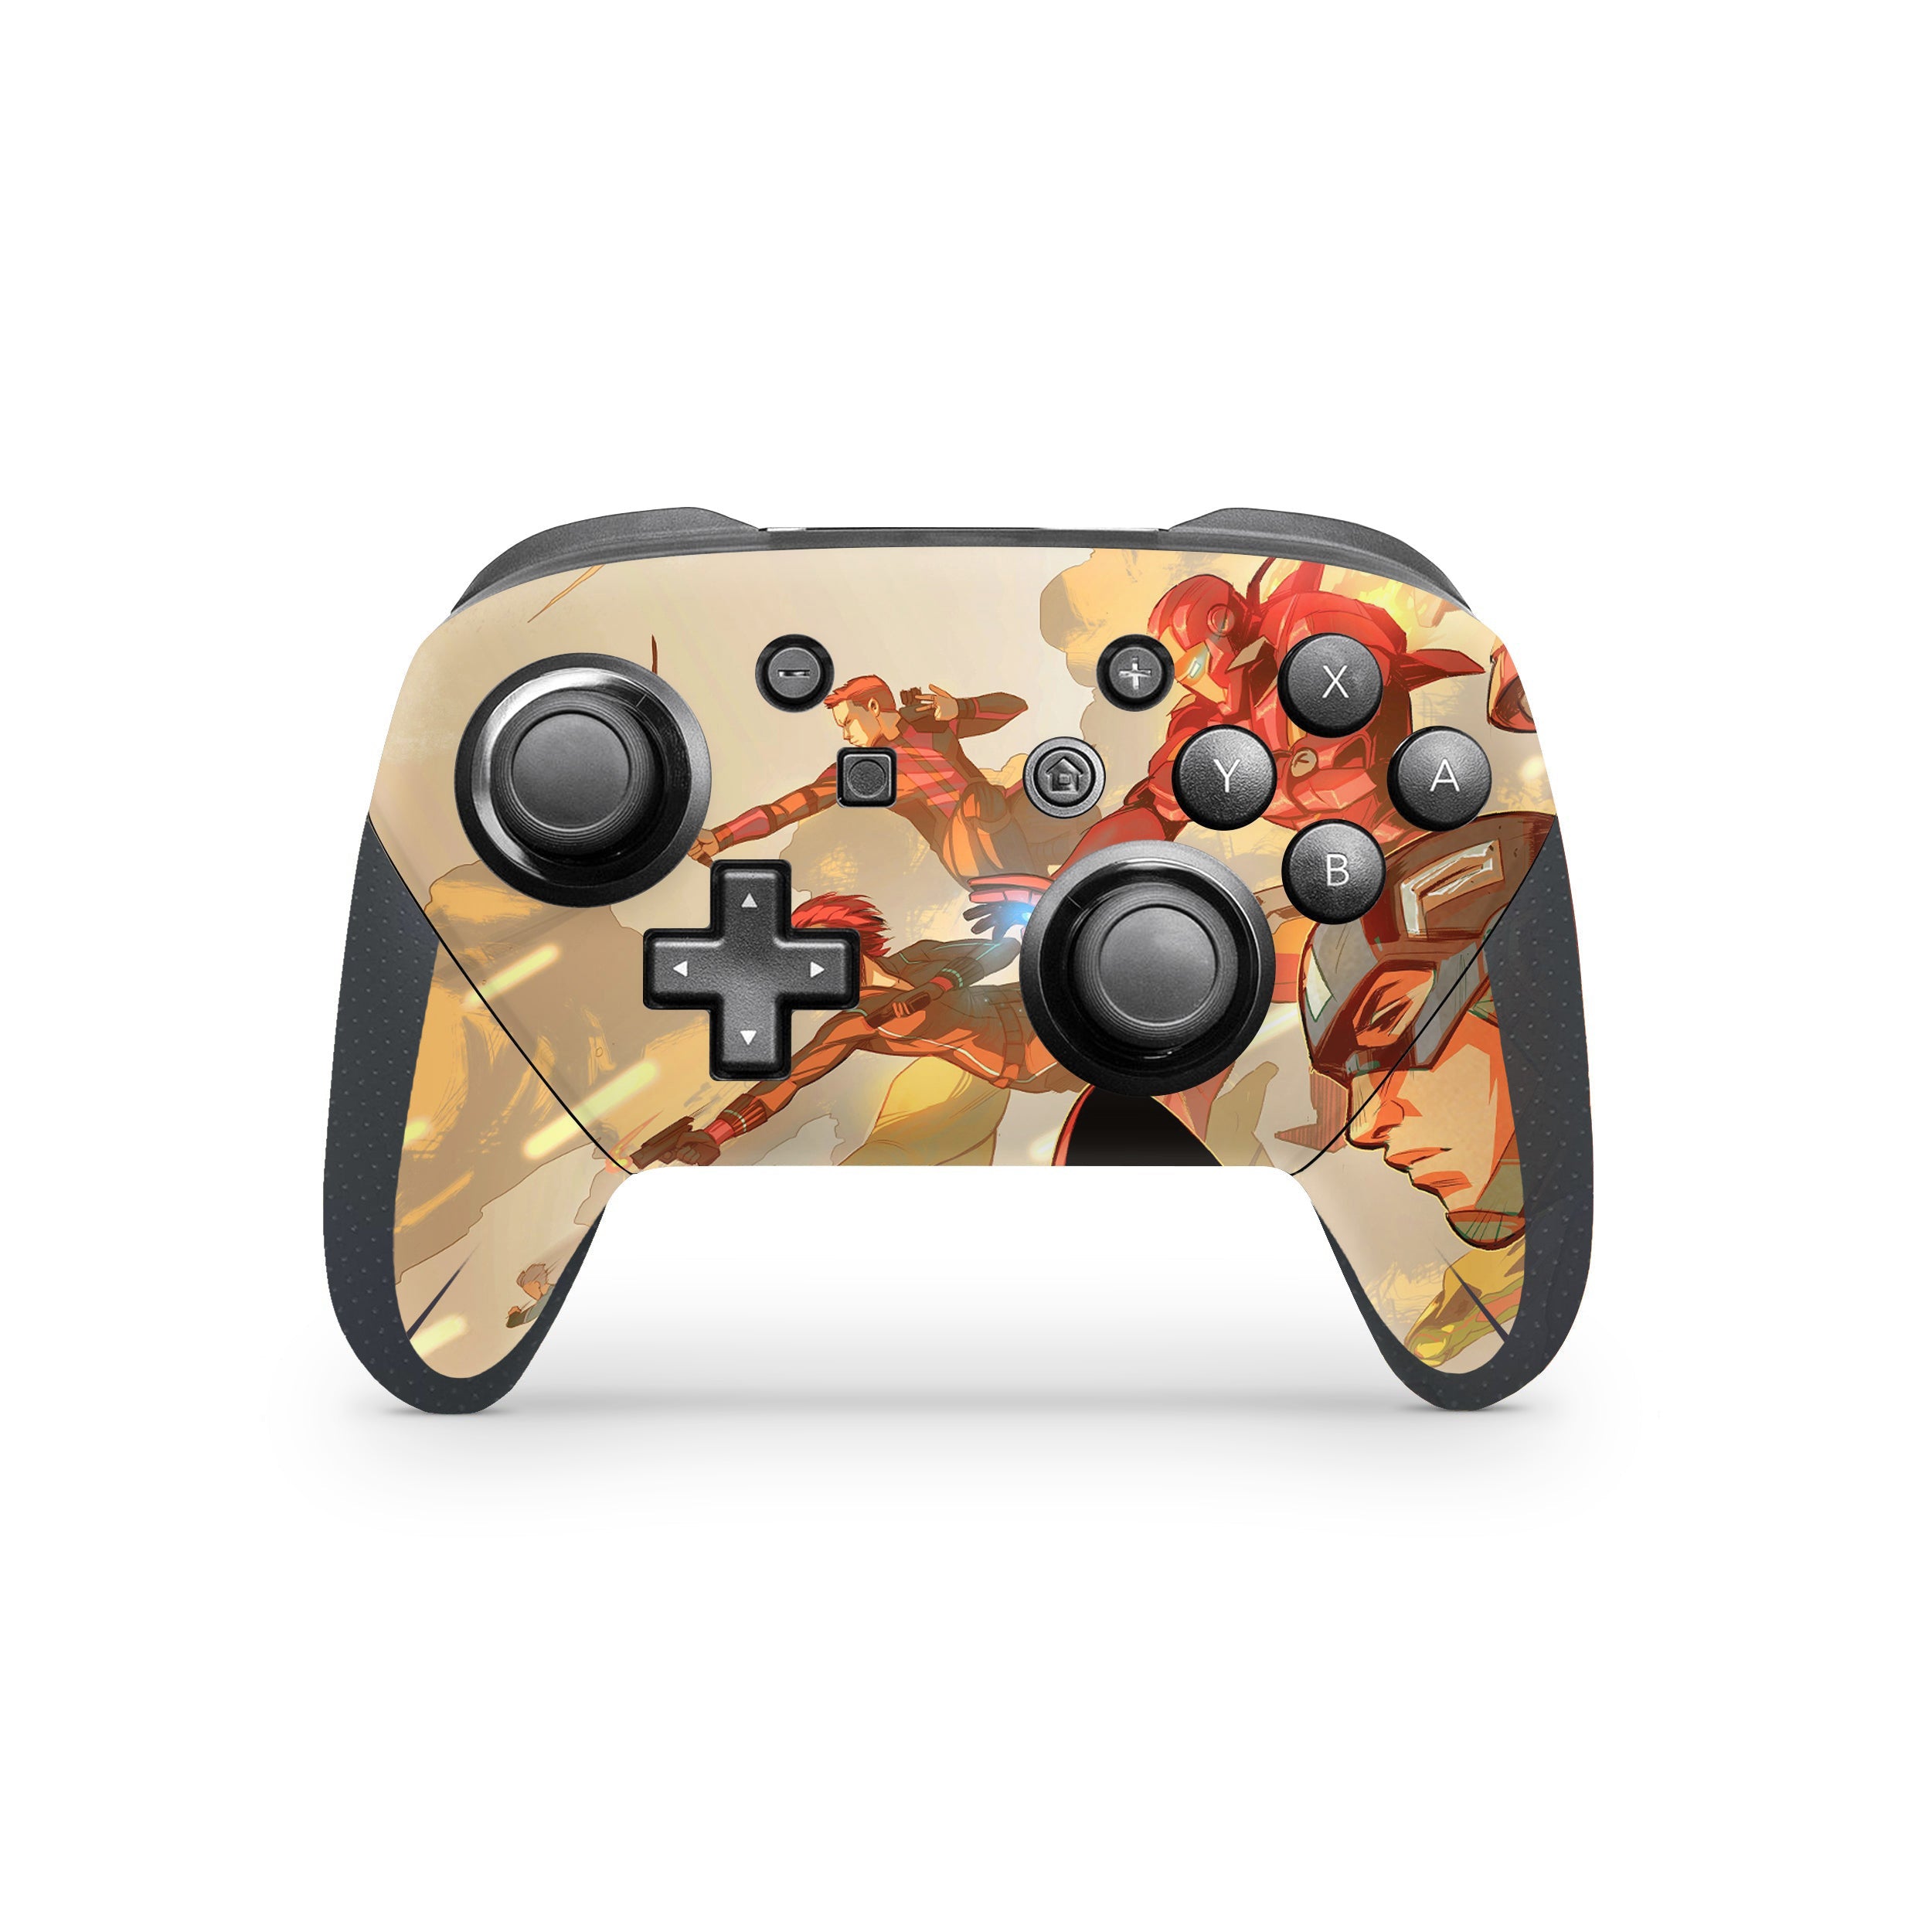 A video game skin featuring a Marvel Comics Avengers design for the Switch Pro Controller.